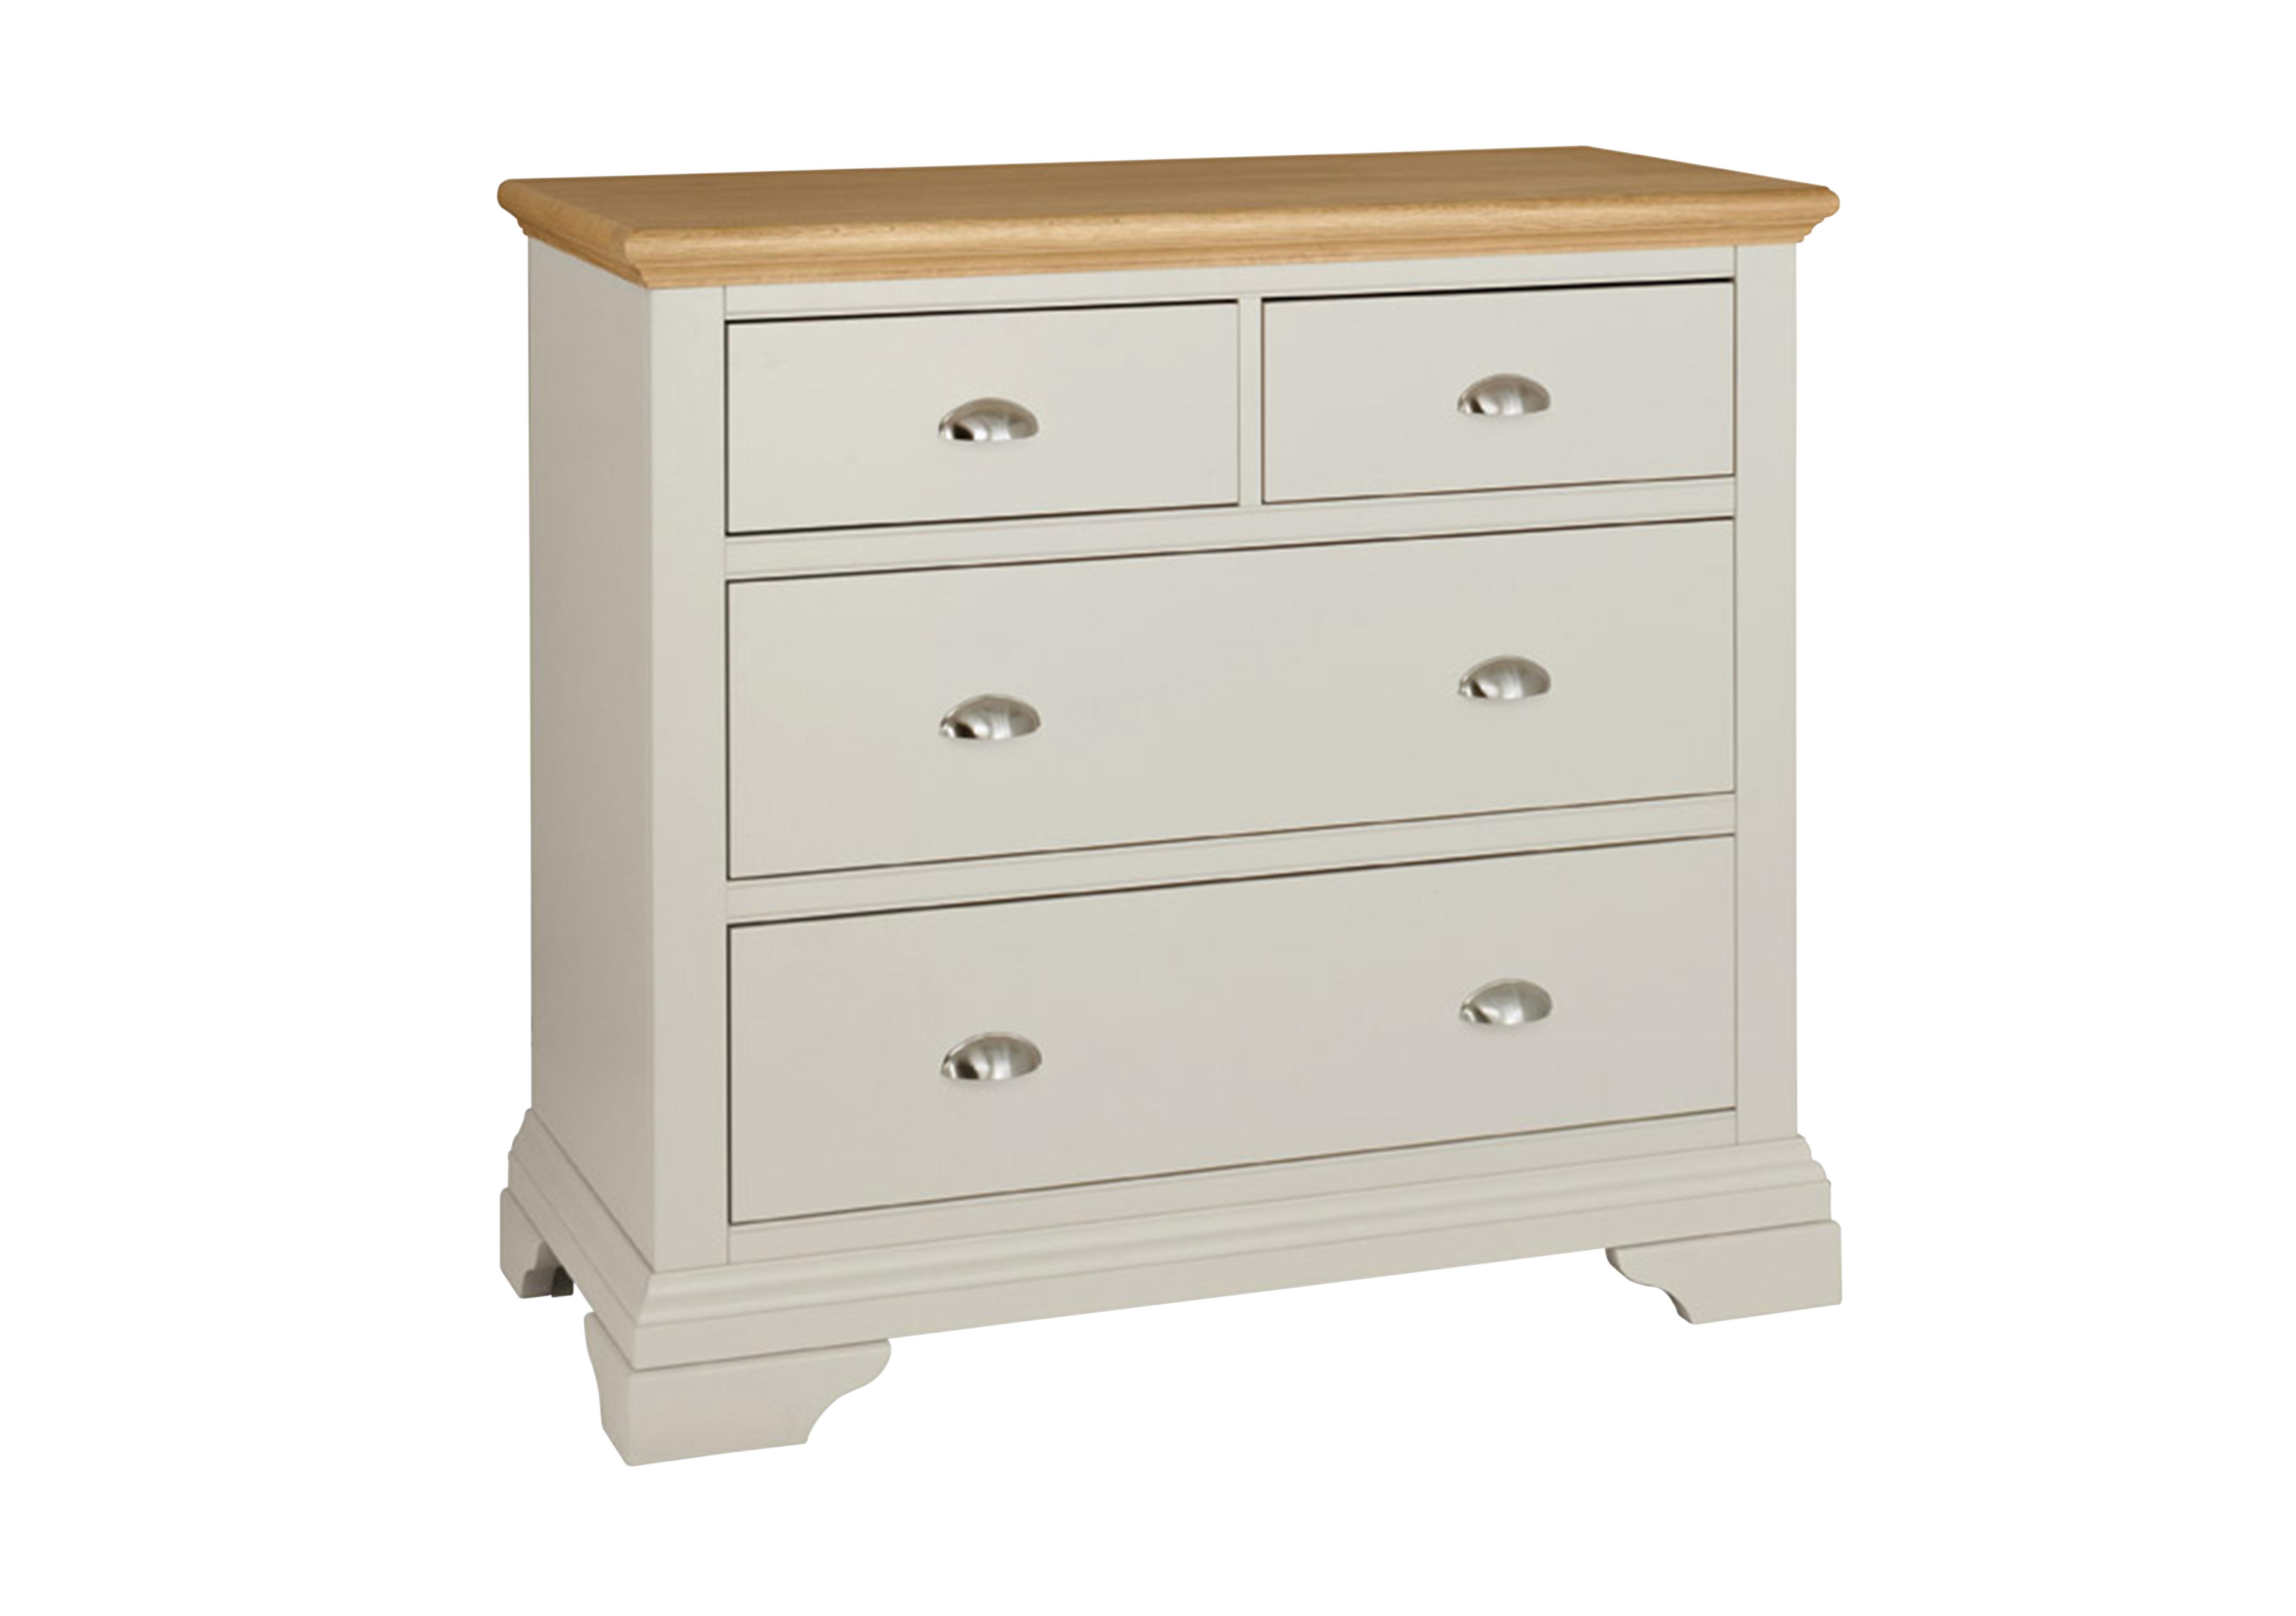 Emily 4 Drawer Chest in Soft Grey And Oak on Furniture Village